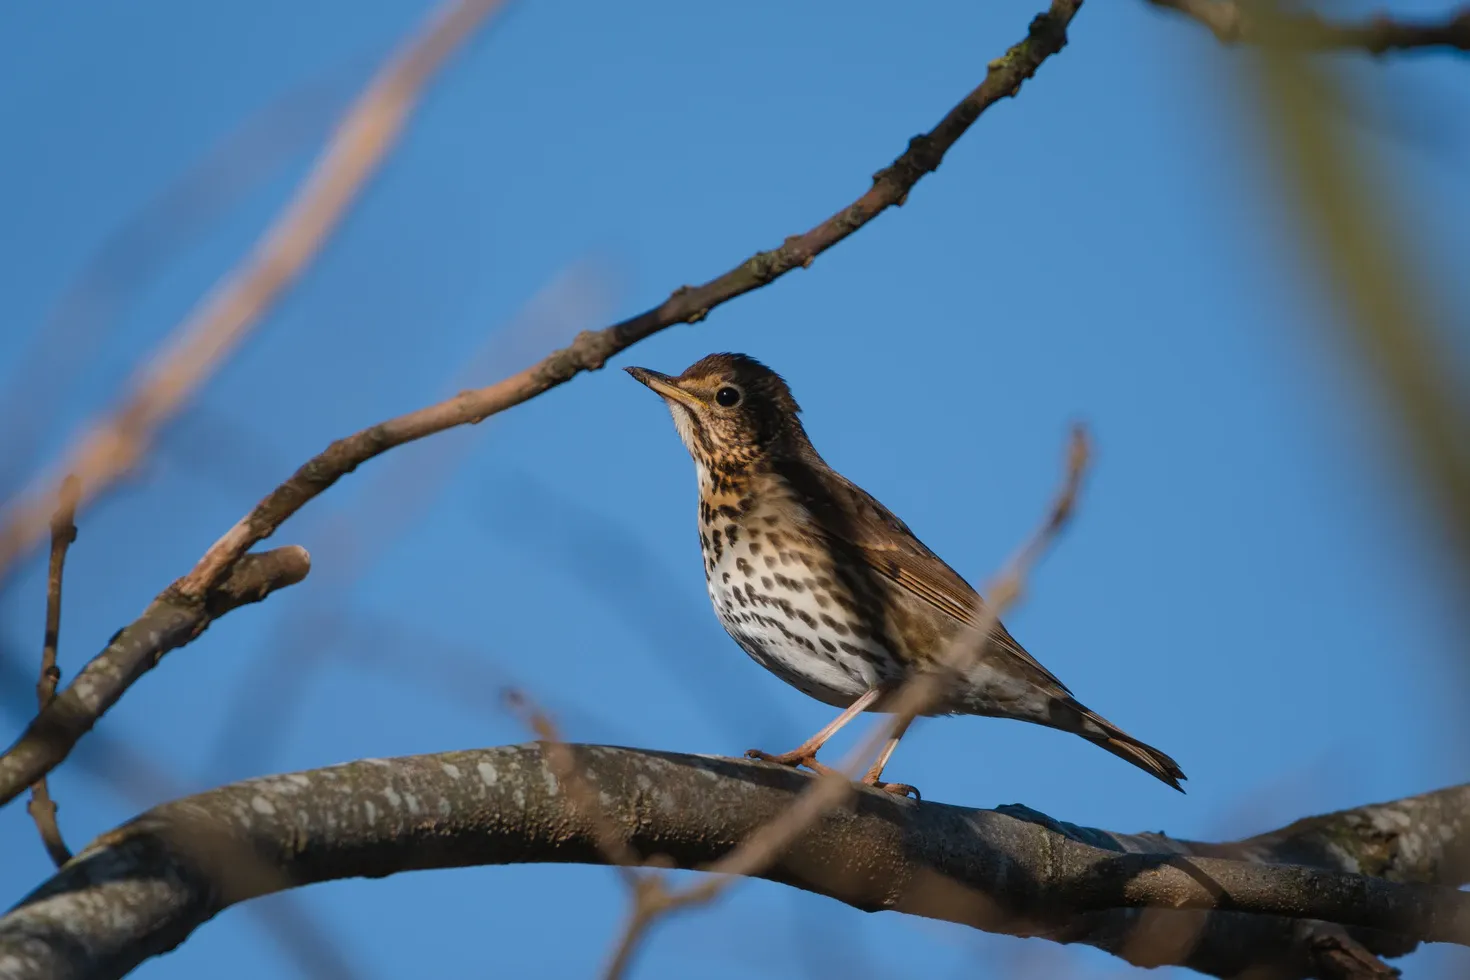 Song Thrush is one of the most popular bird species in North America.